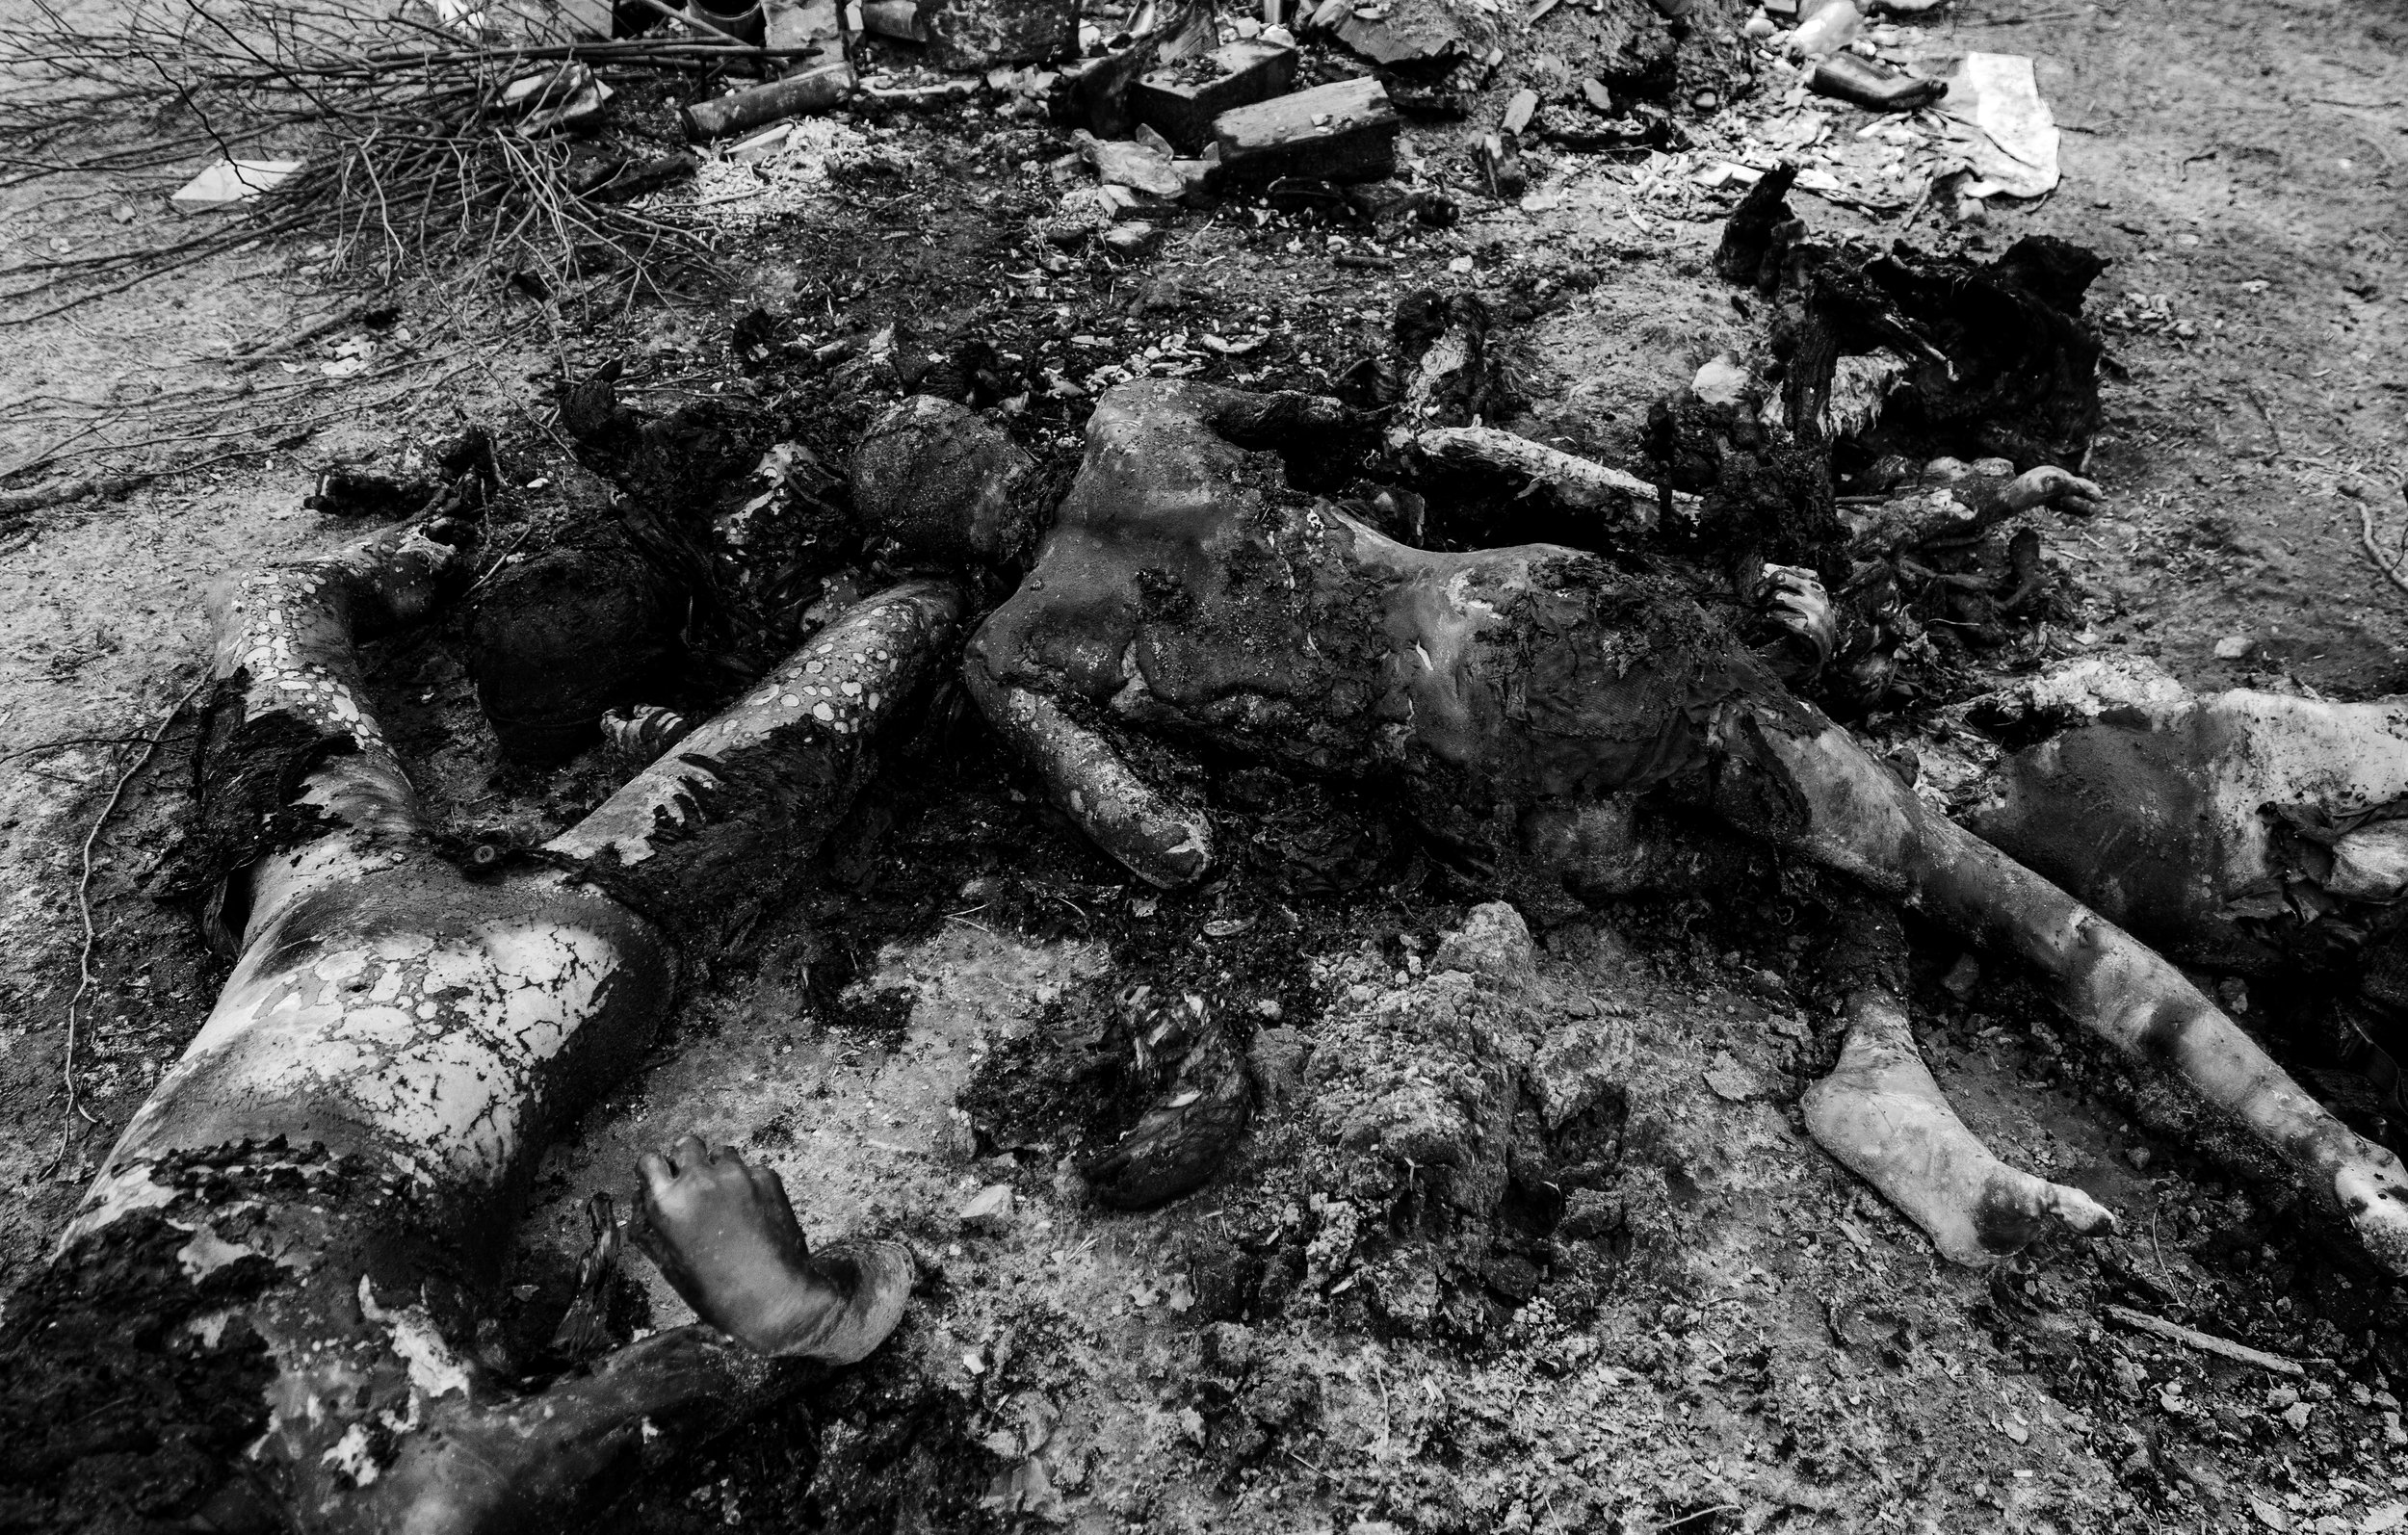  Bodies of a family of four lay tortured and burned in a pile in Bucha, Ukraine following a month of Russian occupation. 